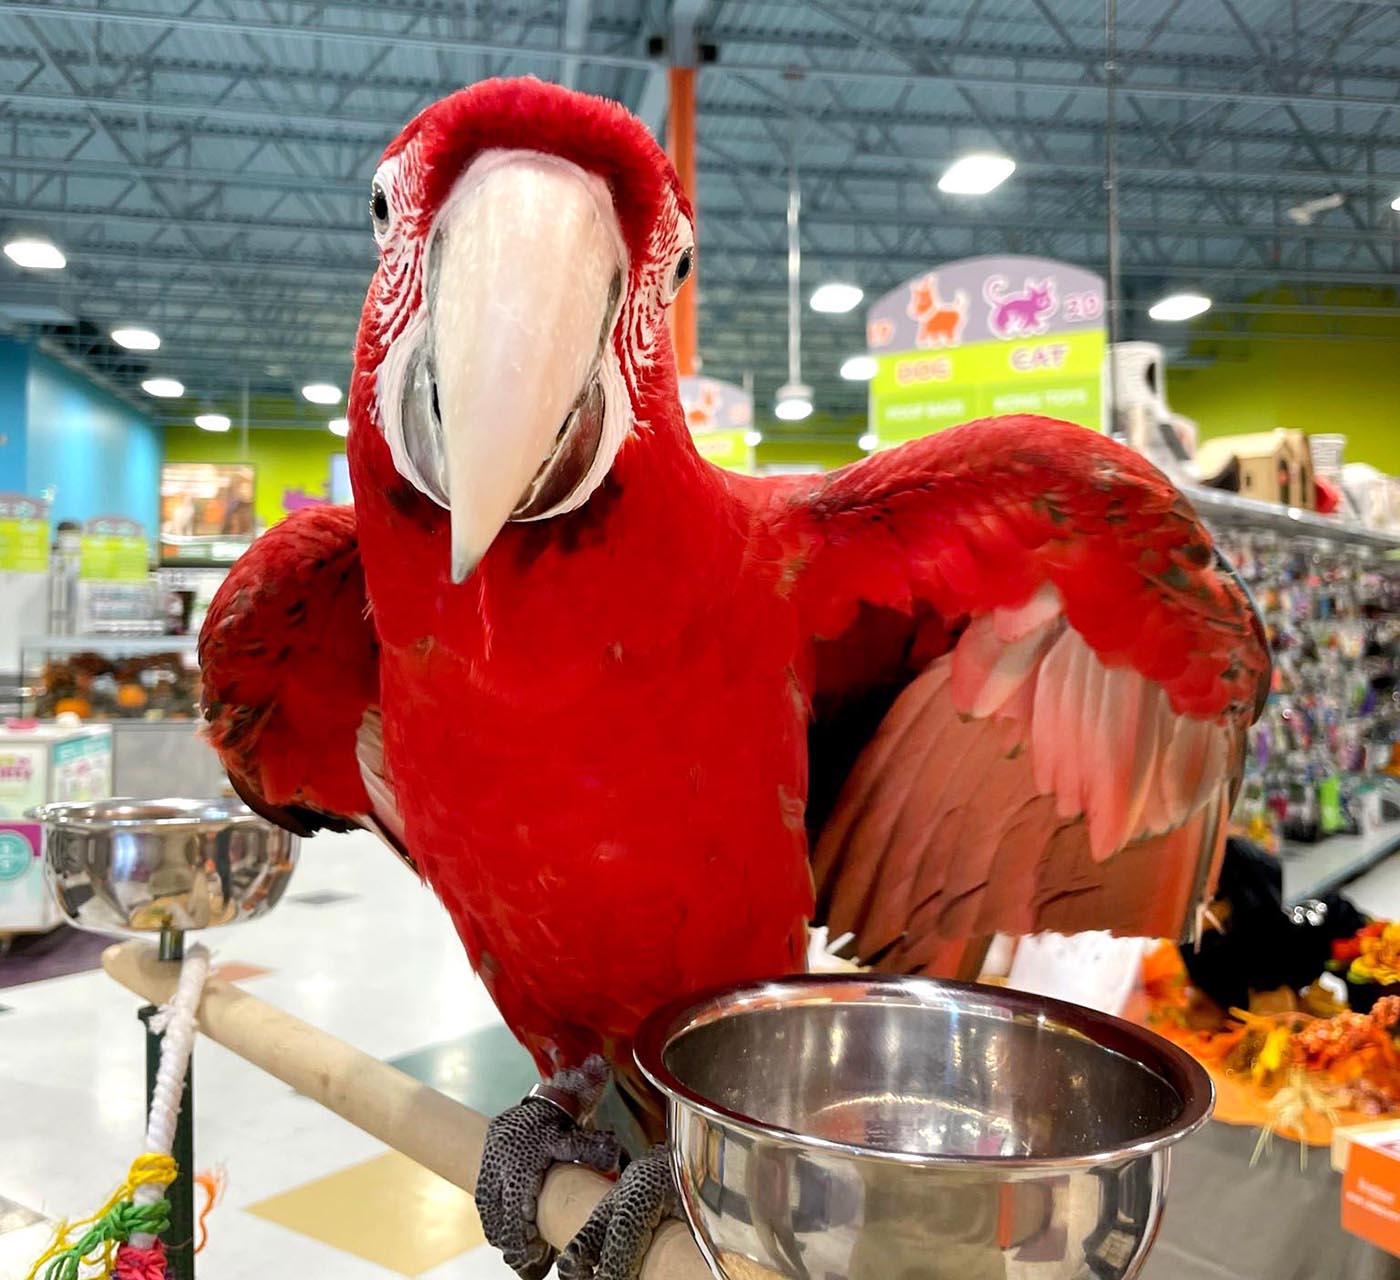 Green-Wing Macaws and African Greys Take Center Stage at Petland - Parrots, Cockatiels, Budgies, Conures, Lovebirds, Canaries, Finches